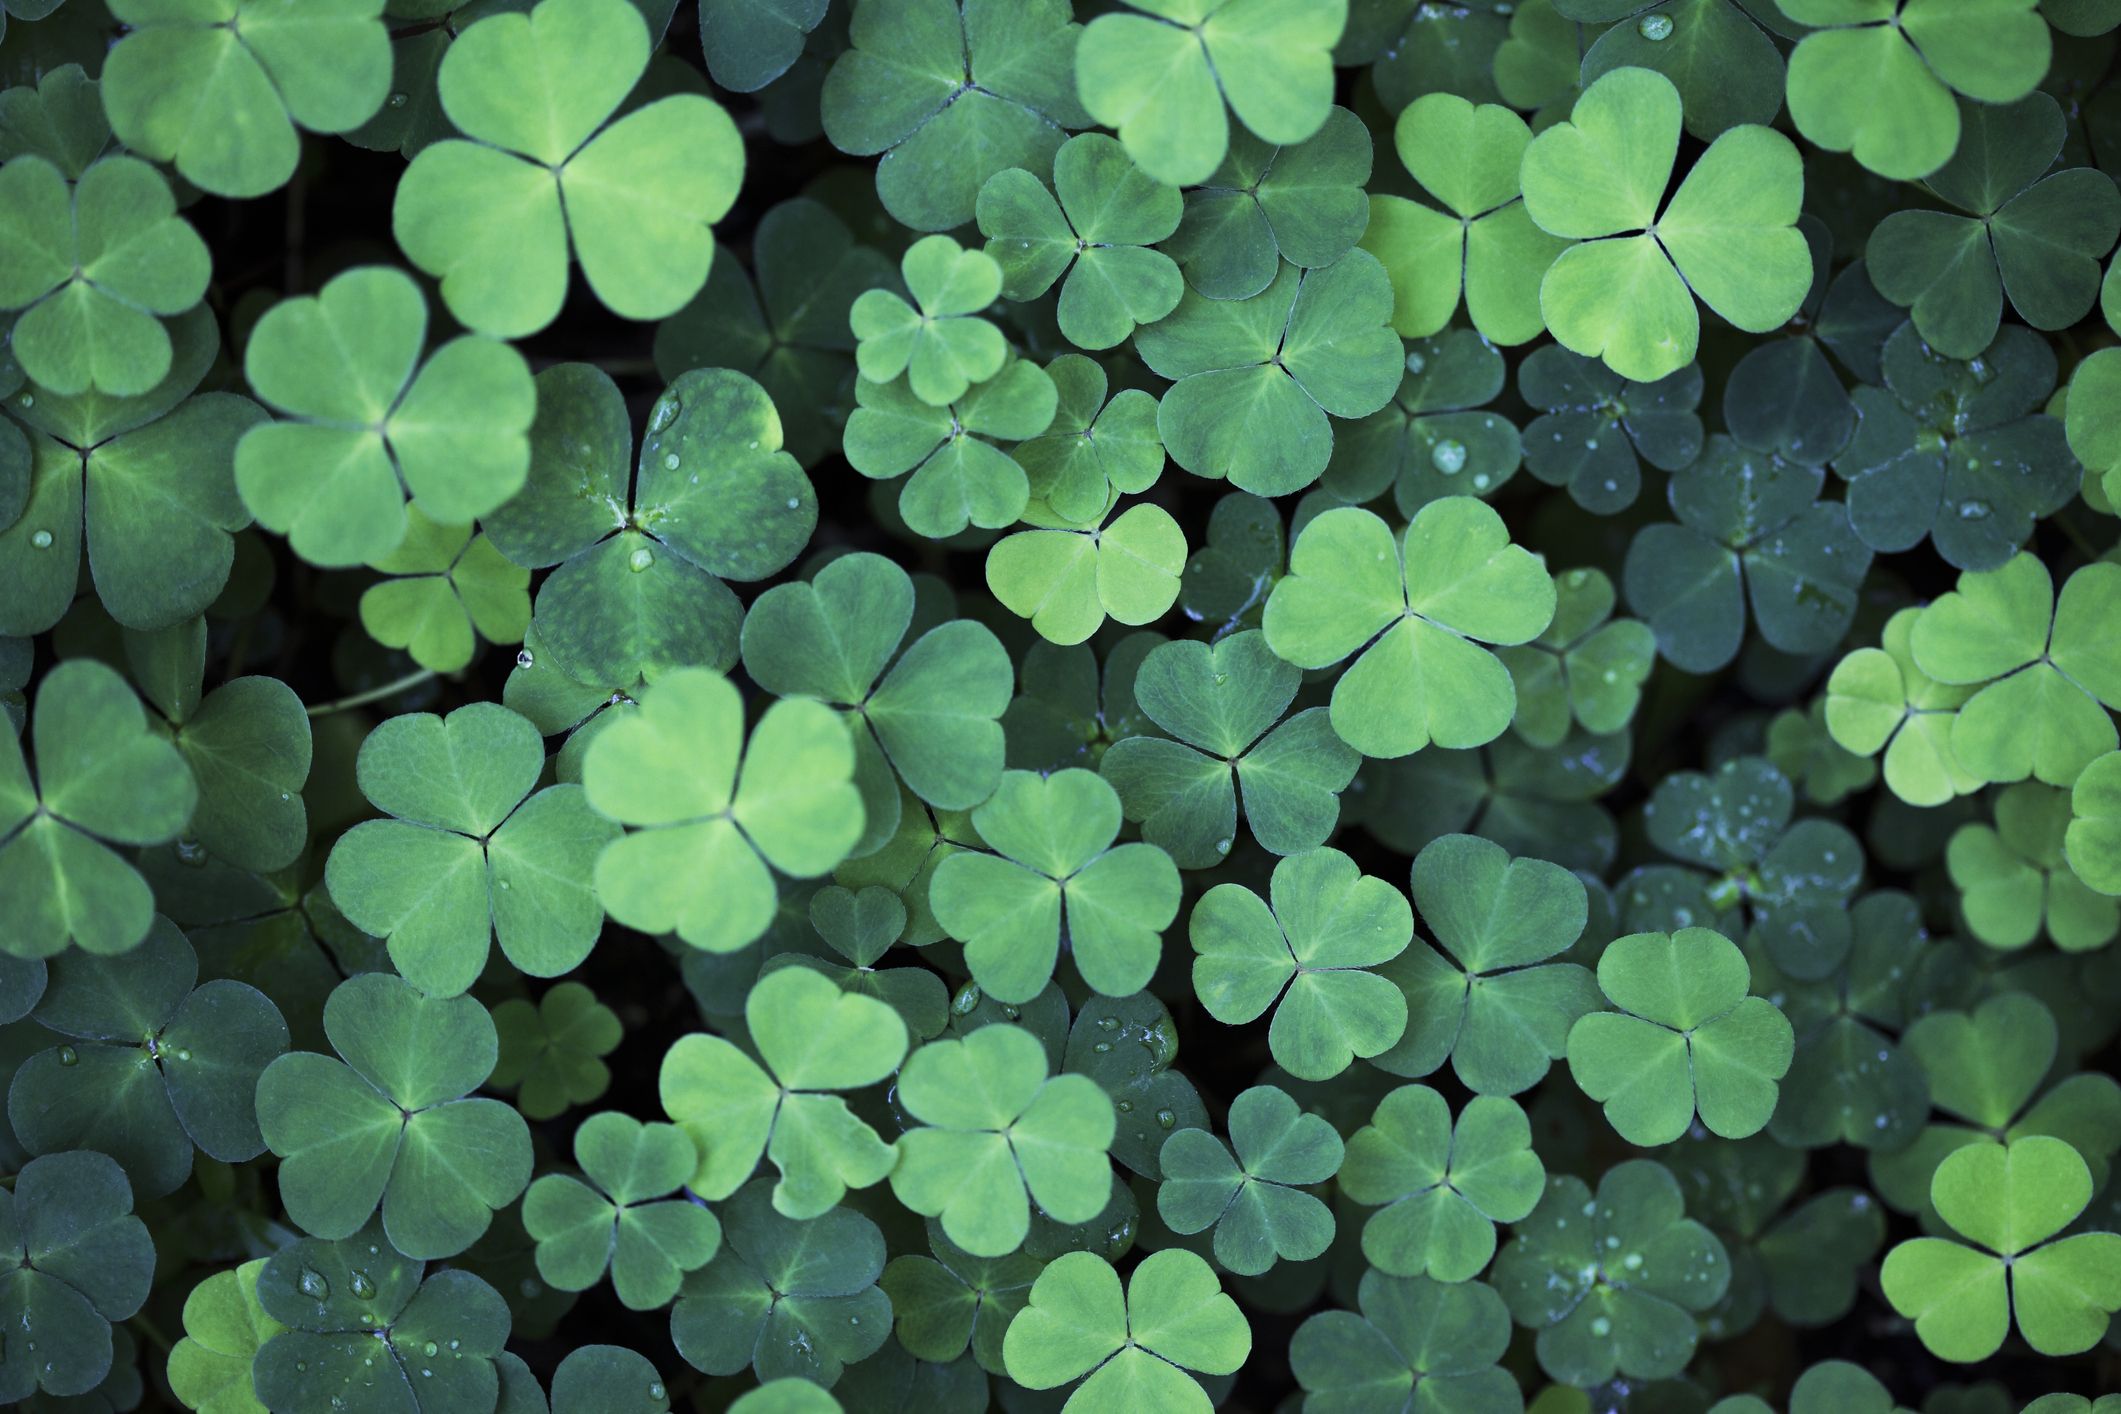 8 Biggest St. Patrick's Day Traditions Around the World